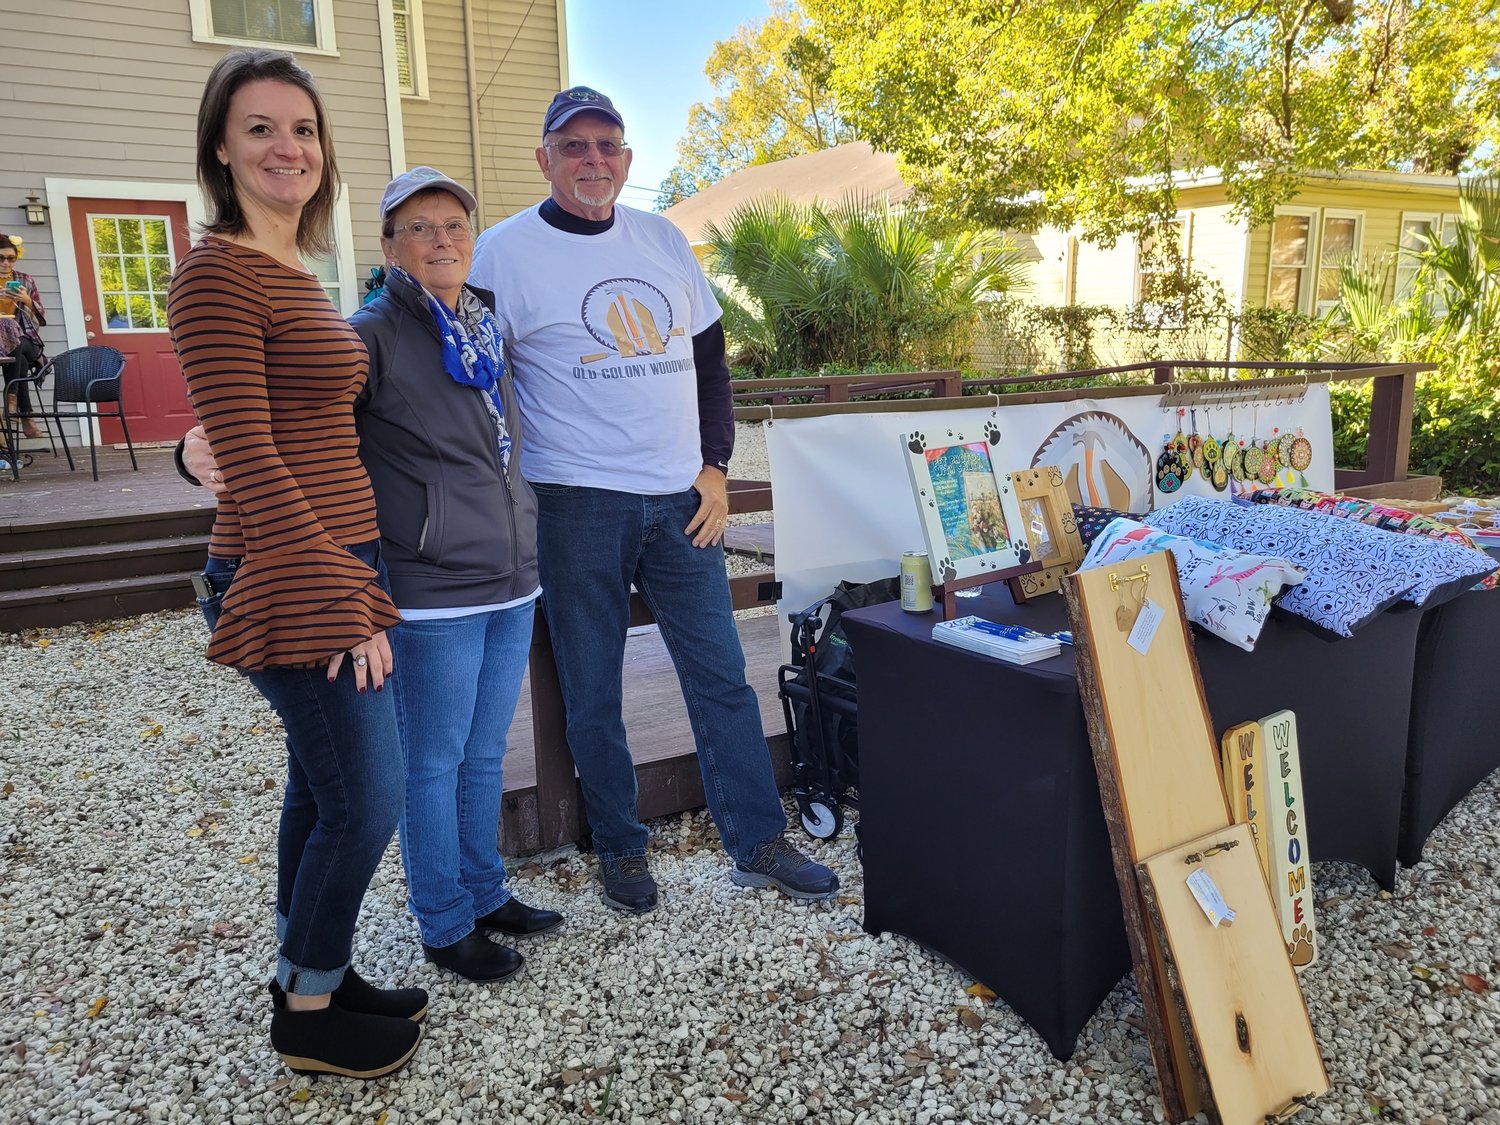 Dr. Carla Rodrigues, left, and Old Colony Woodwork vendors at the Artisans Market fundraiser for Celestial Farms.